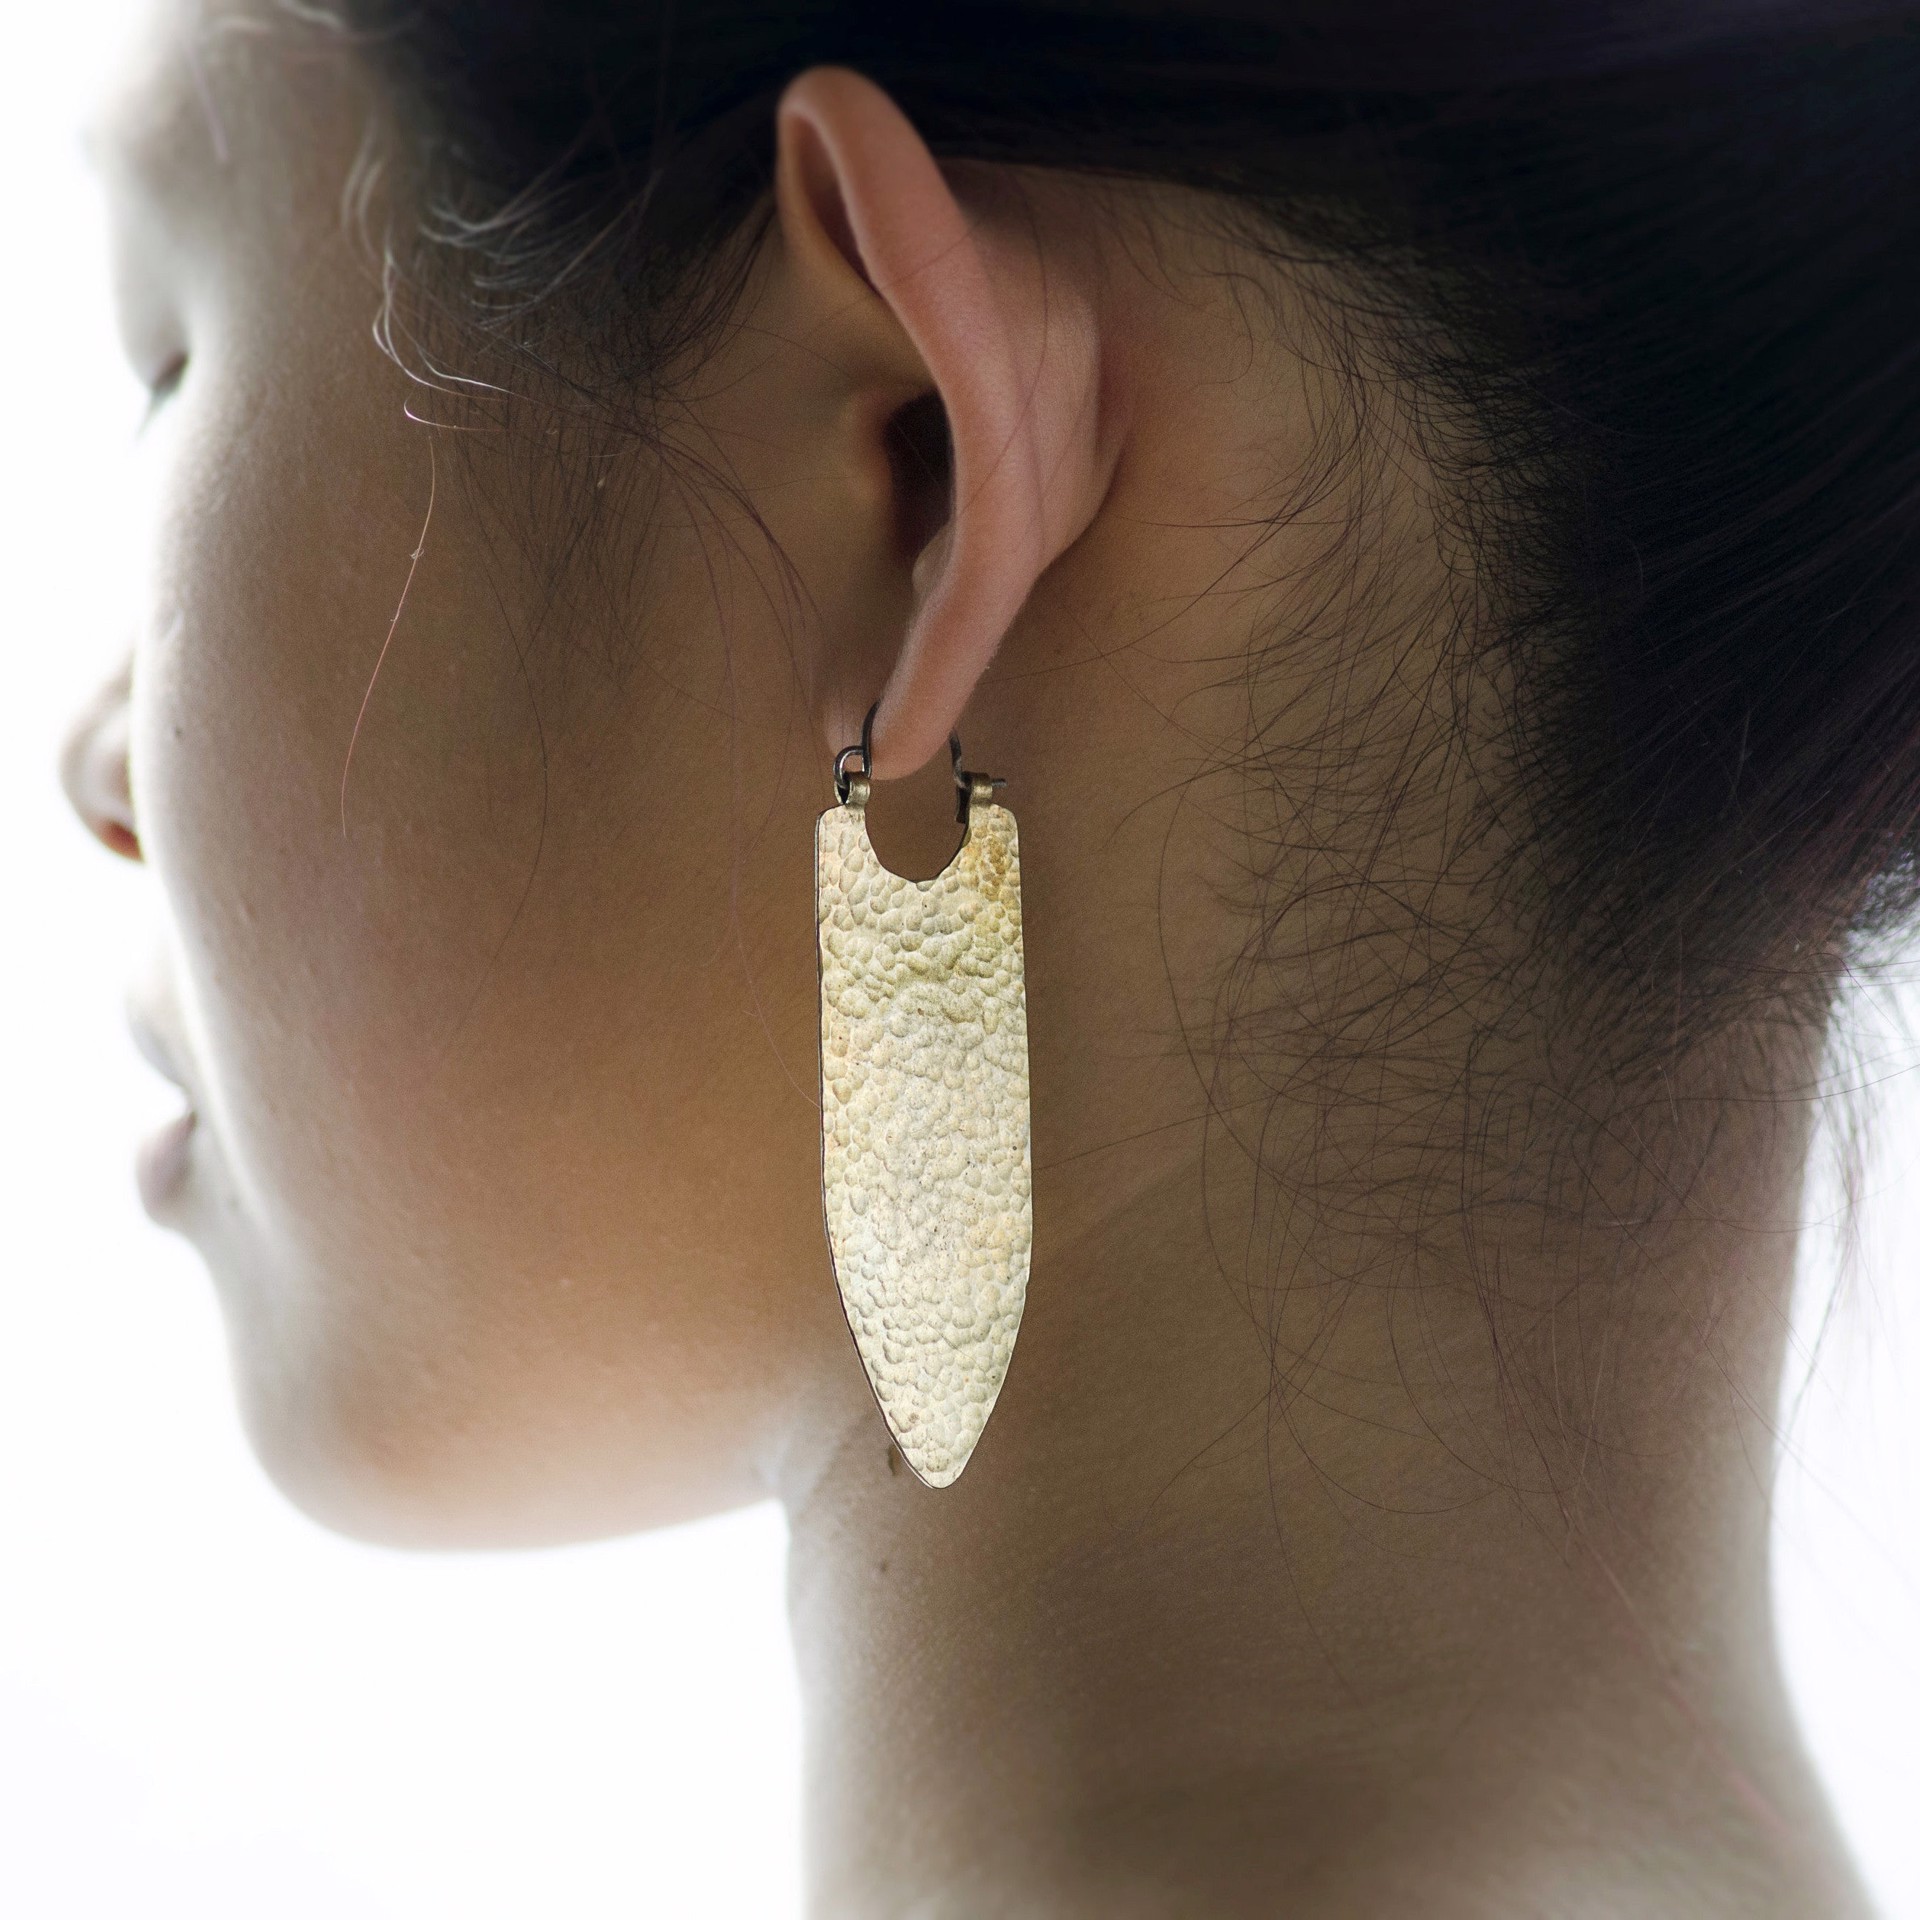 Banner Earrings in Antiqued Brass by Clementine & Co. Jewelry